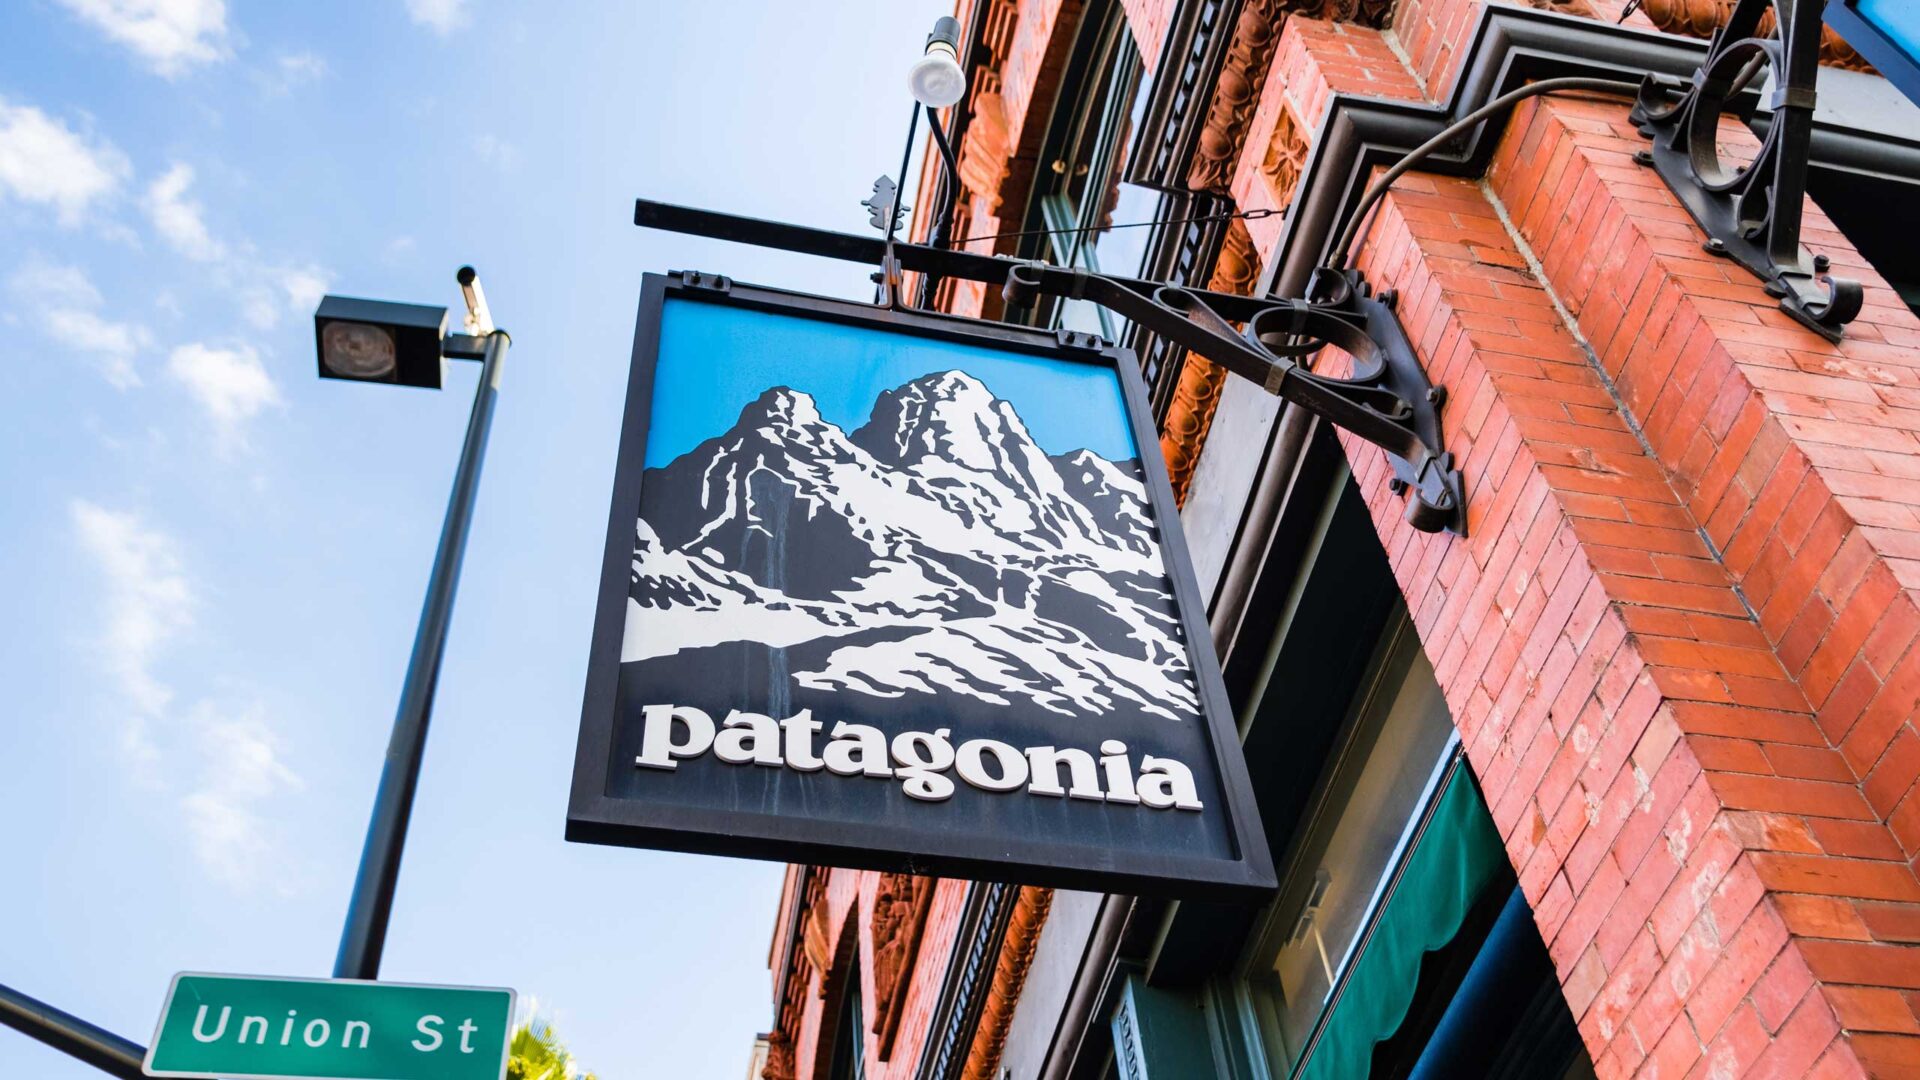 How Patagonia Became Fashion's Favorite Outdoor Brand